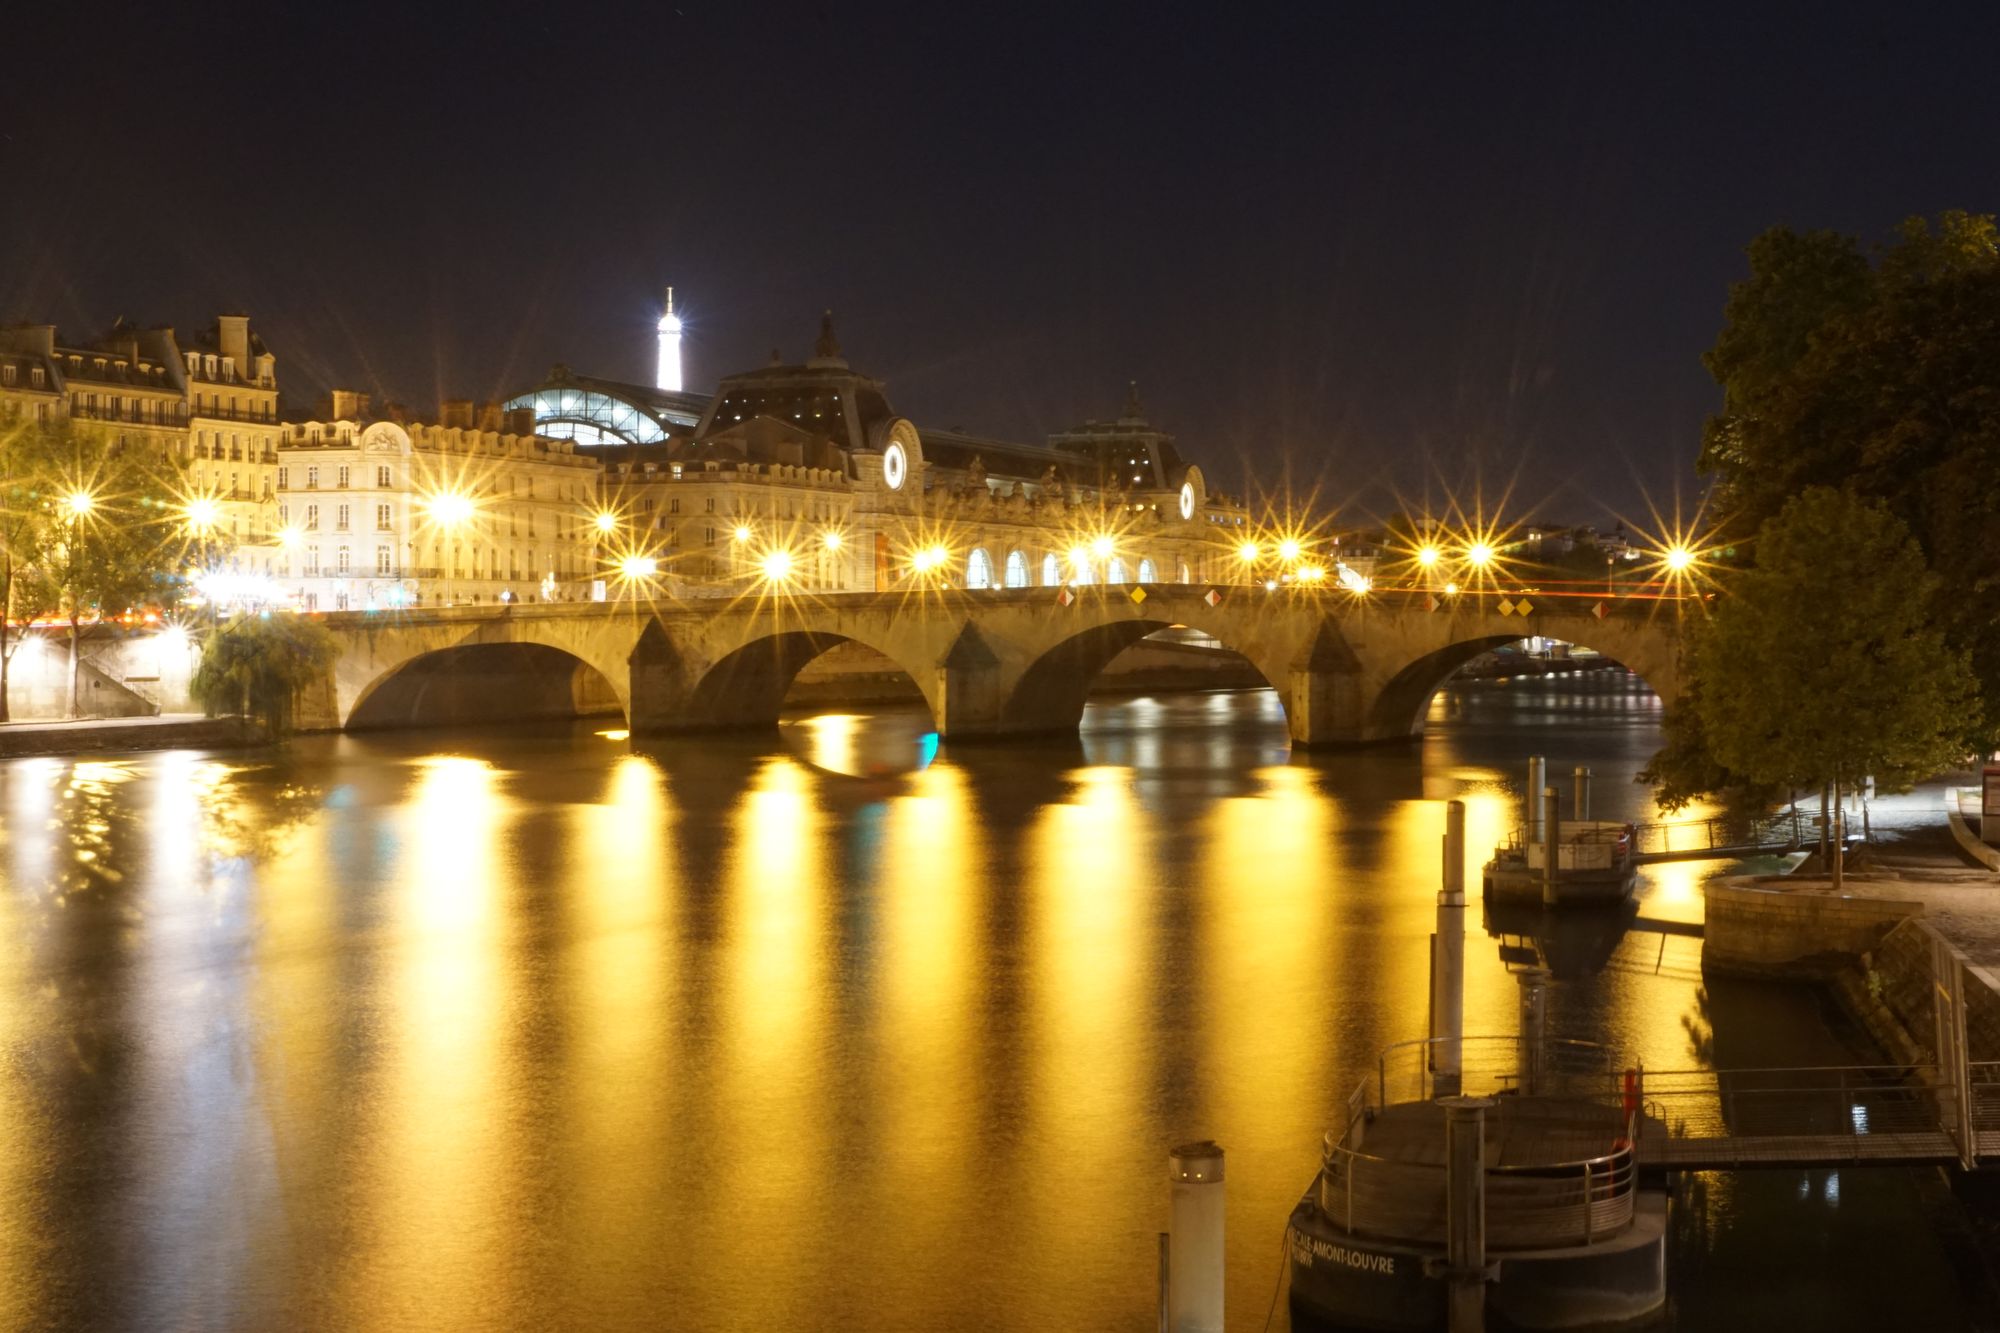 A bridge reflected in a river at night. In the distance, the Eiffel Tower is brightly lit.